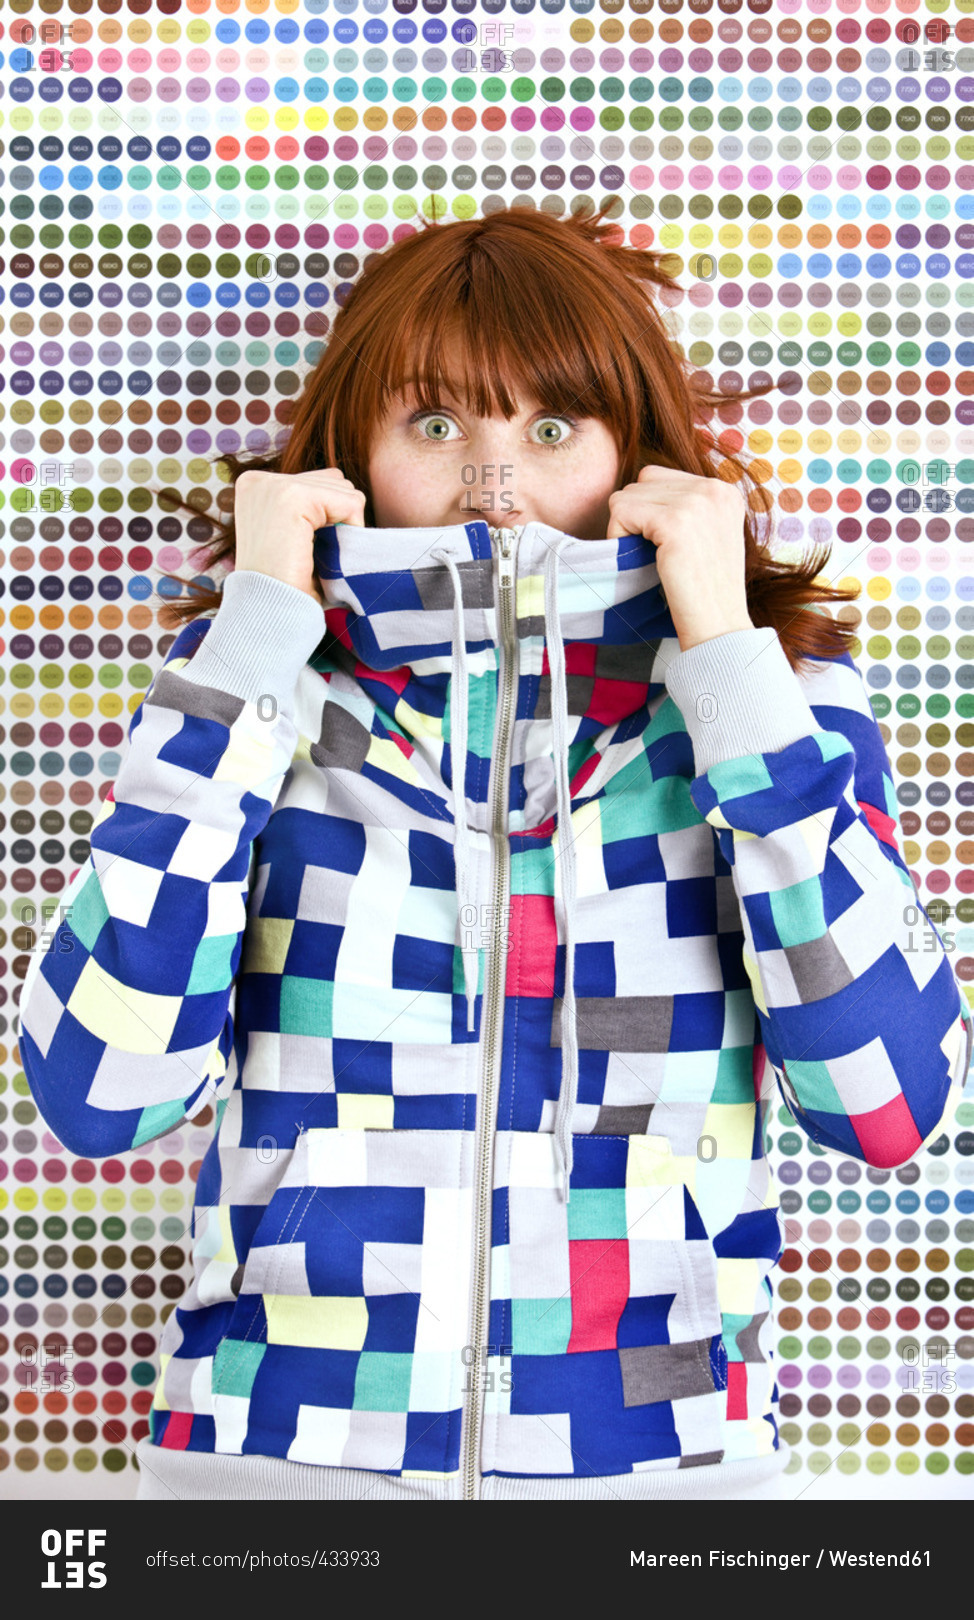 Frightened young woman wearing patterned jacket in front of dotted wall